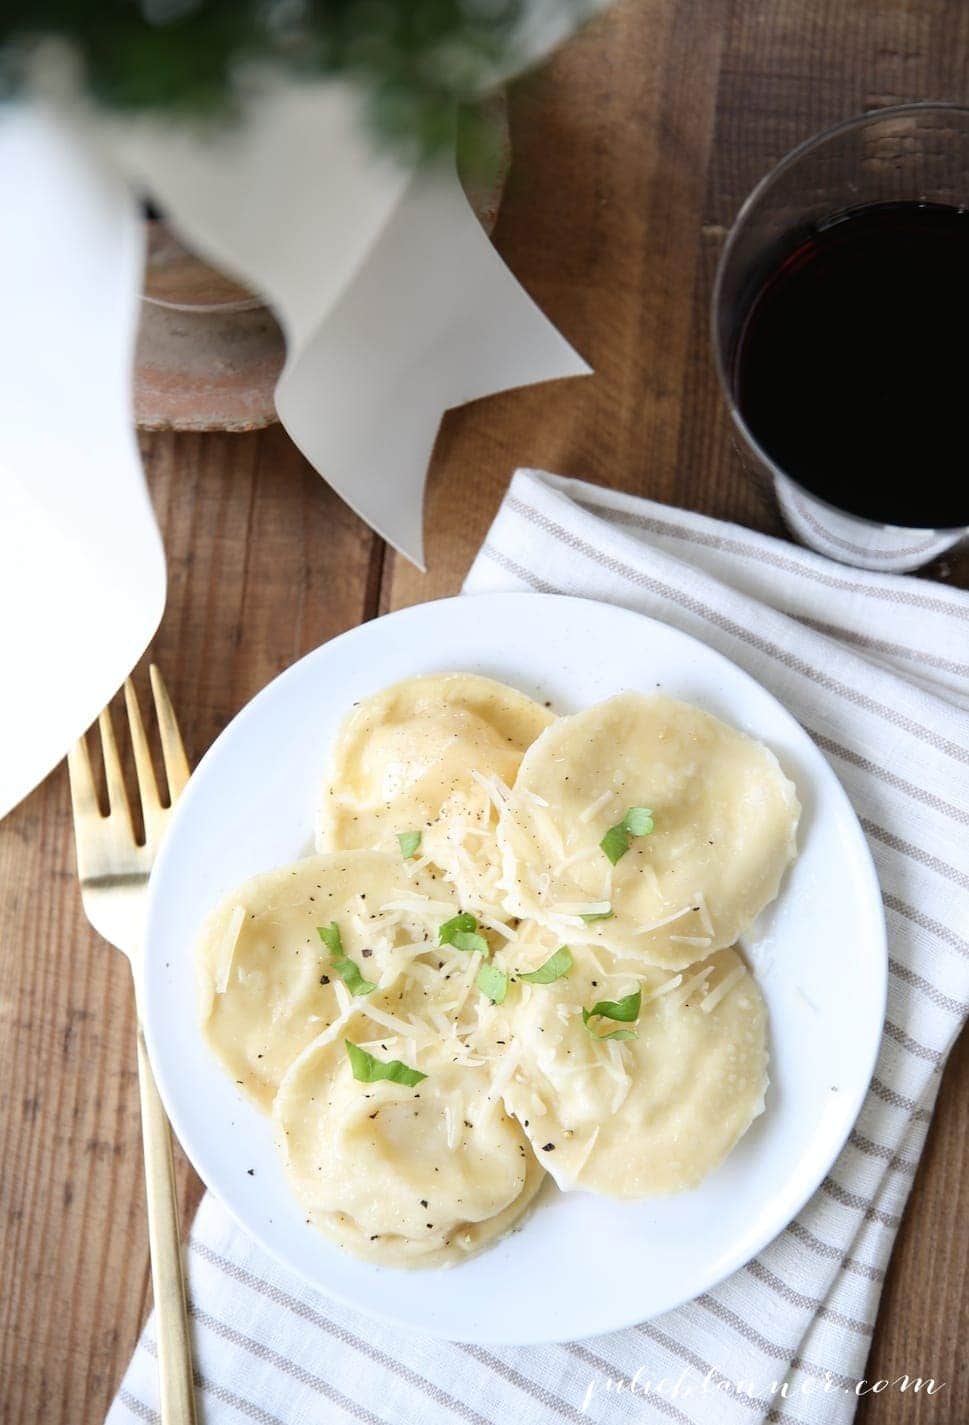 A plate of homemade ravioli on a striped napkin, wine and gold flatware surrounding.